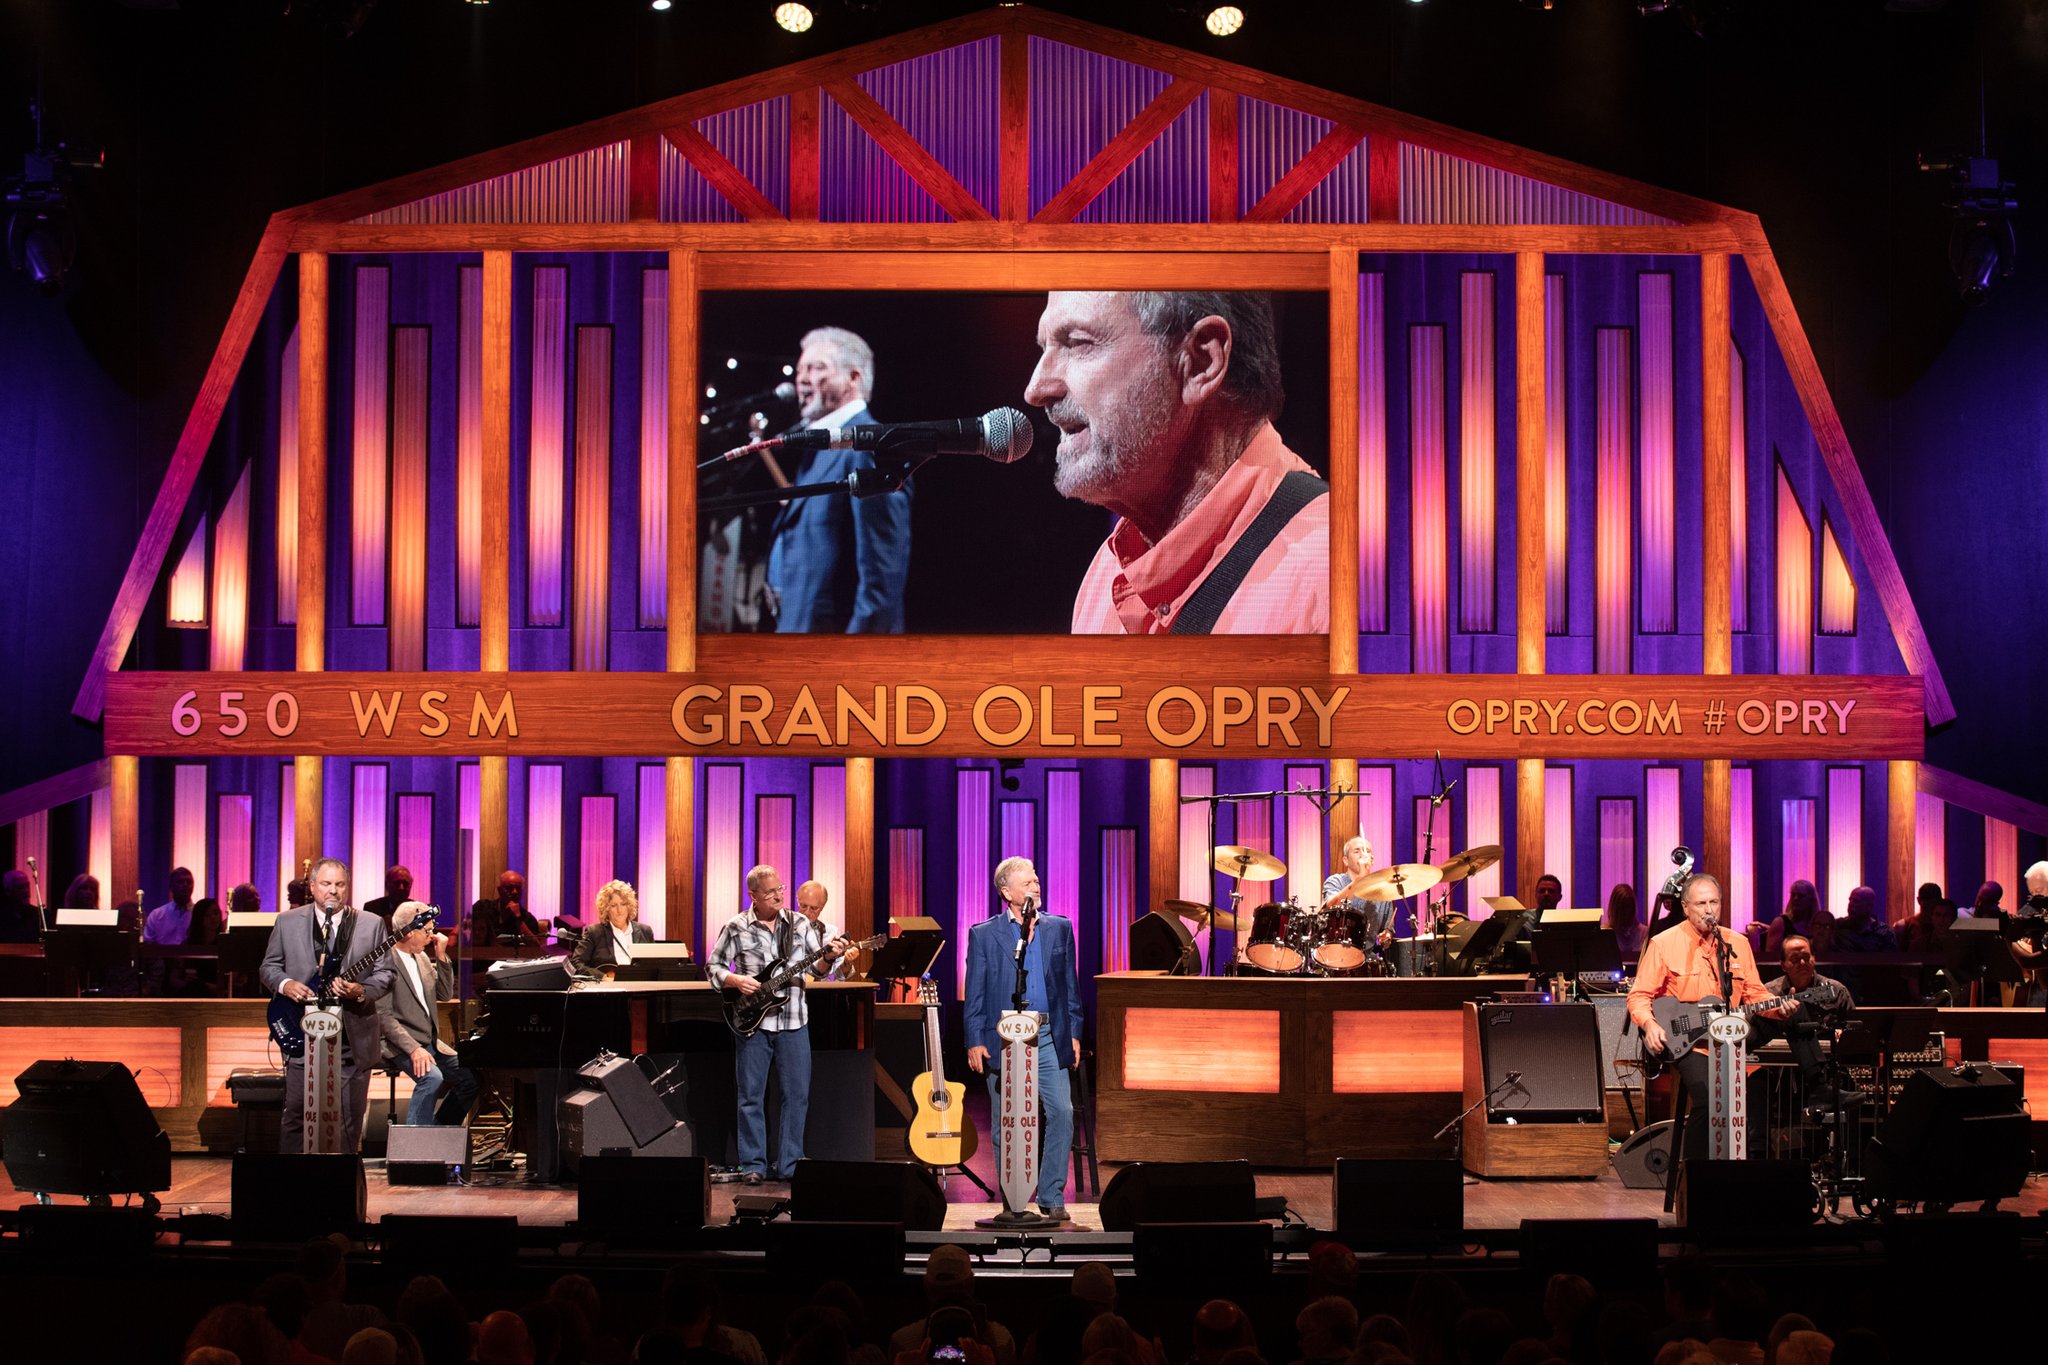 Join us in wishing a very happy birthday to Opry member Larry Gatlin today! 